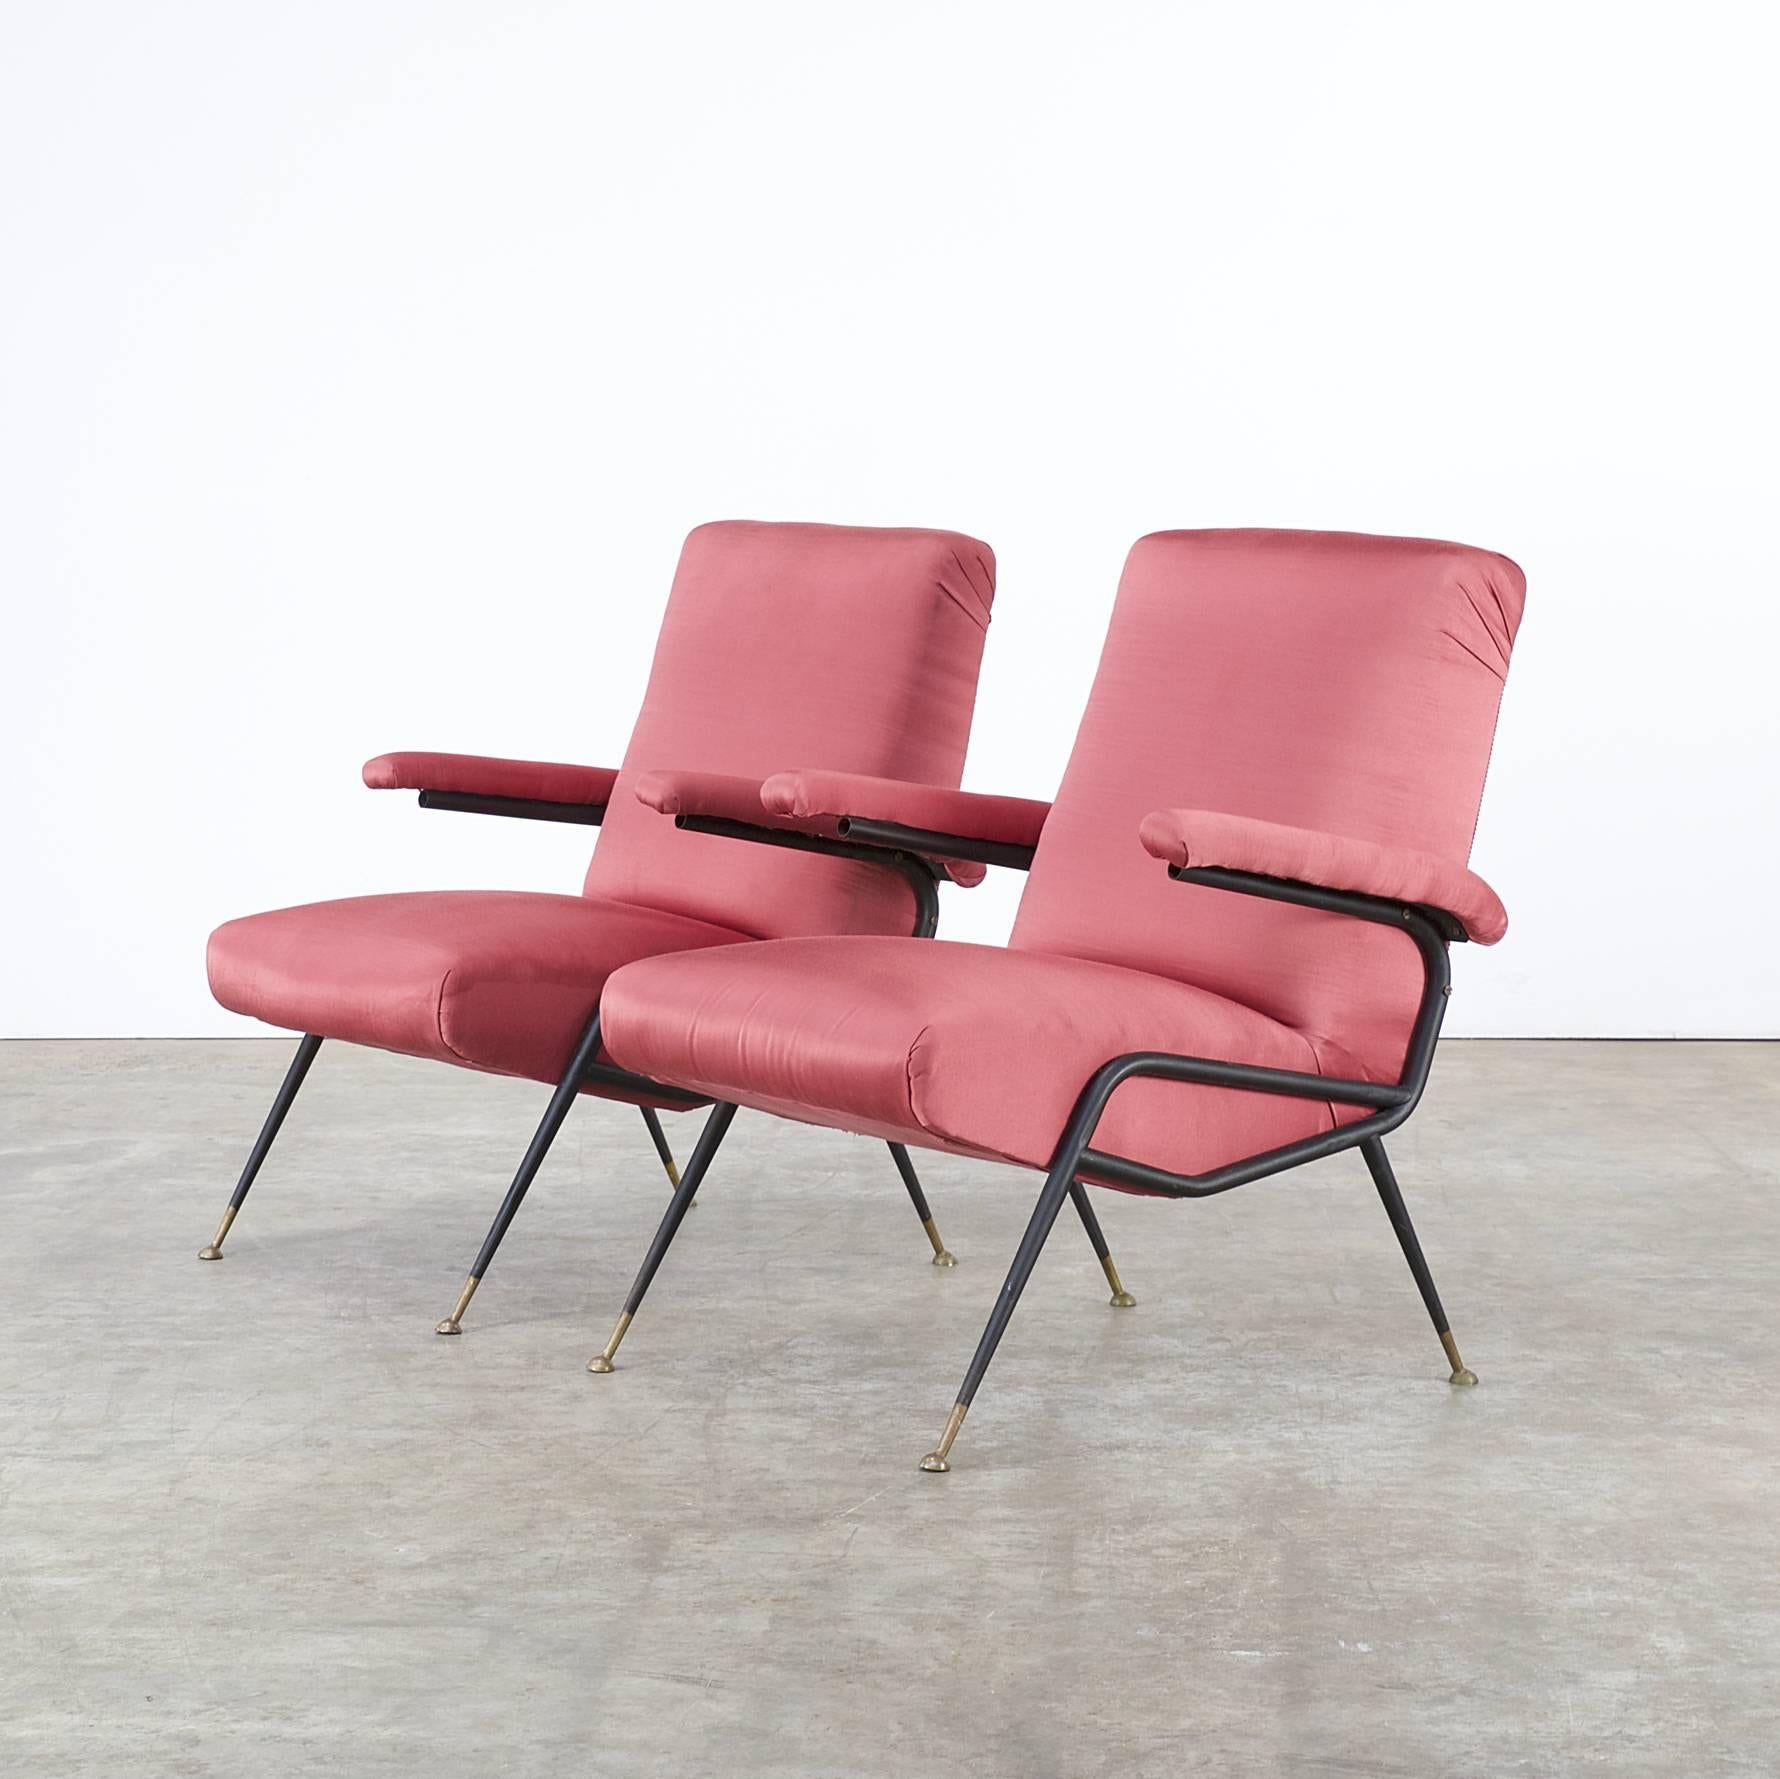 Lacquered 1960s Italian Design Chair in Old Red Fabric, Set of Two For Sale